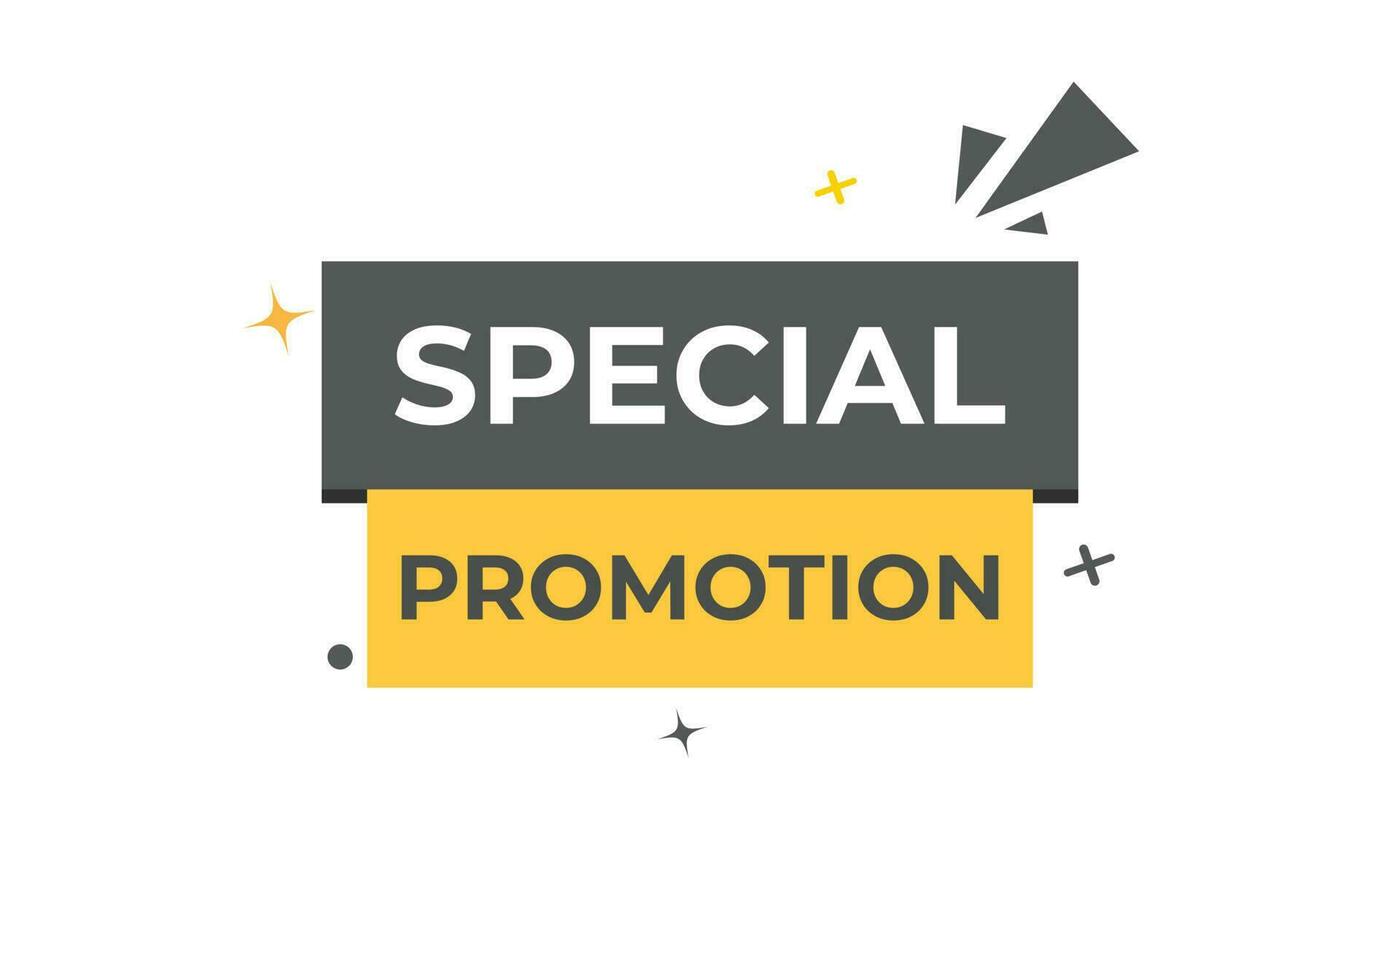 Special Promotion Button. Speech Bubble, Banner Label Special Promotion vector